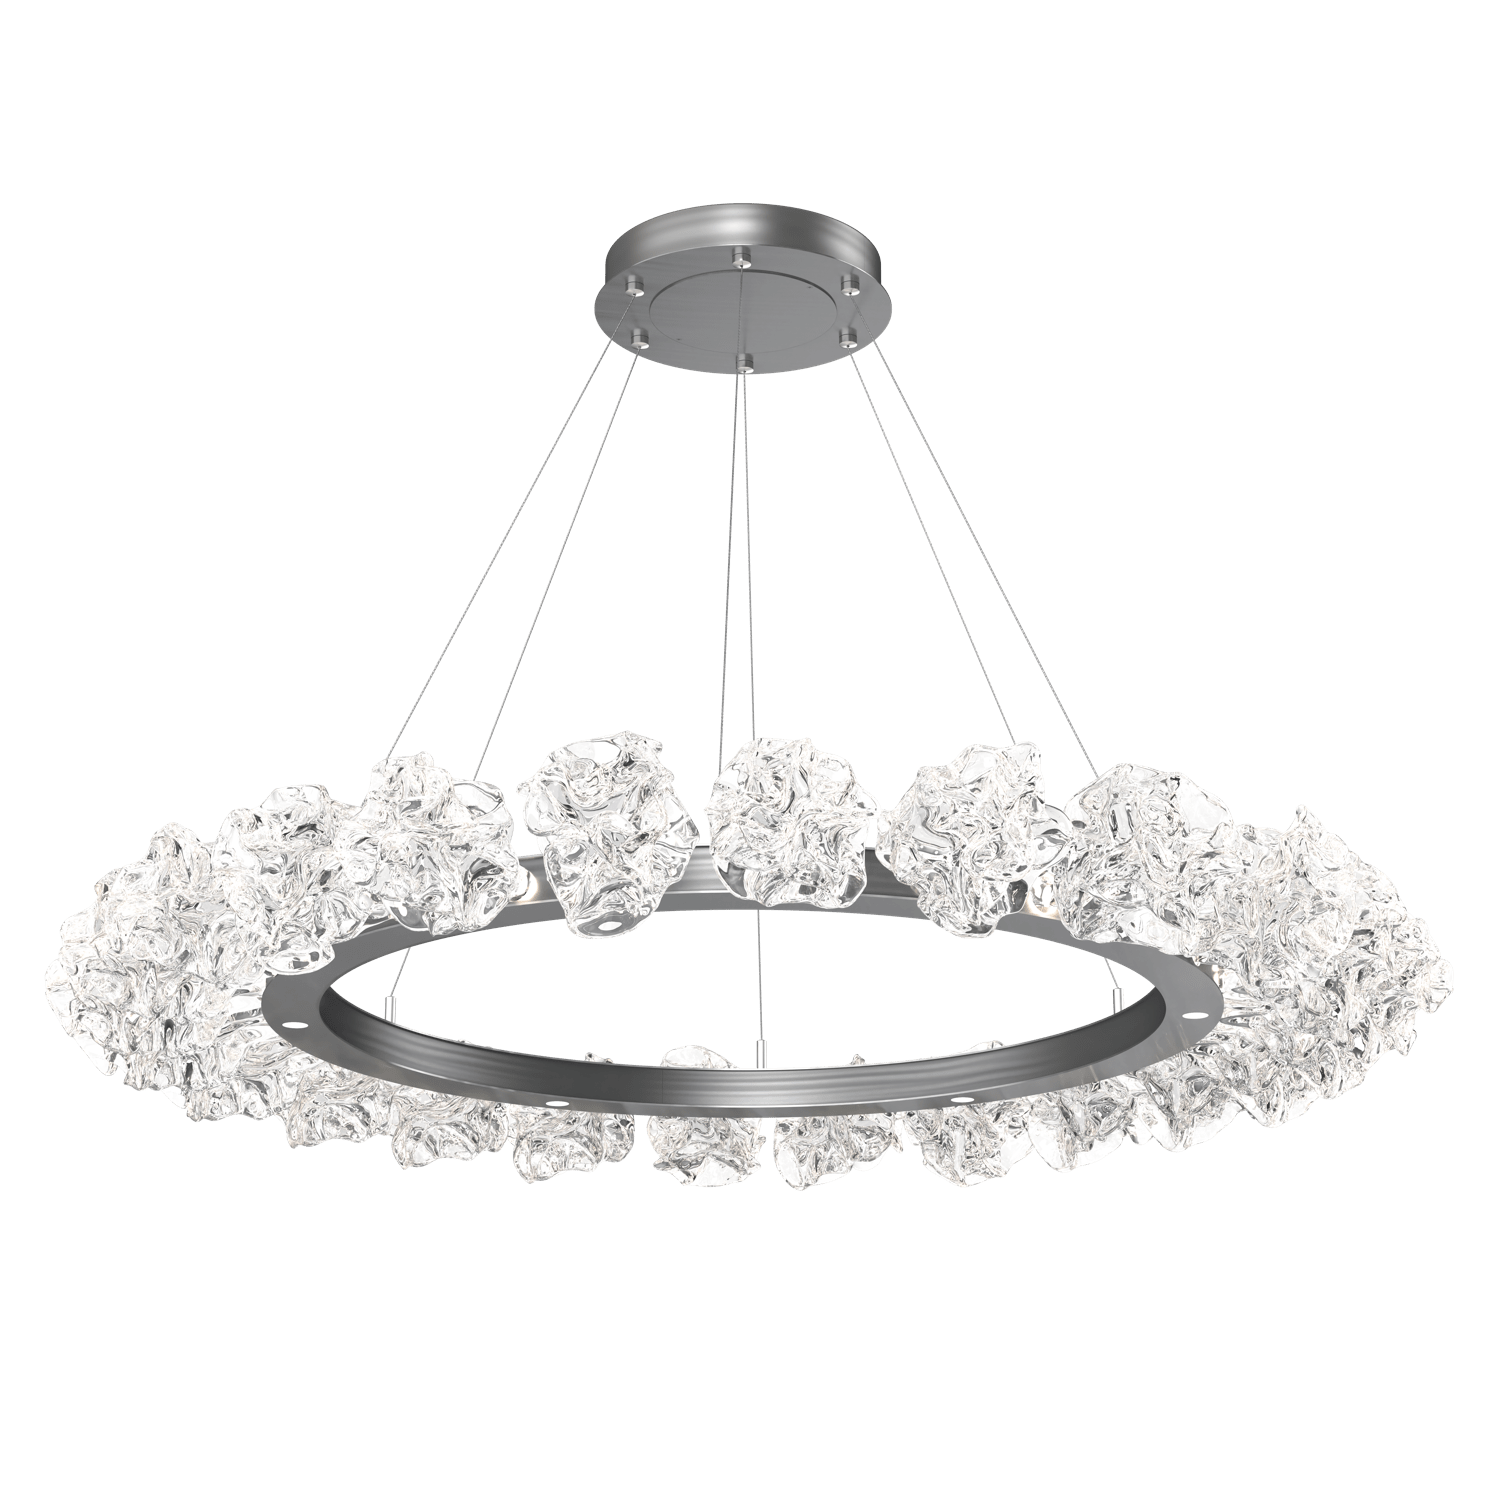 CHB0059-50-GM-Hammerton-Studio-Blossom-50-inch-radial-ring-chandelier-with-gunmetal-finish-and-clear-handblown-crystal-glass-shades-and-LED-lamping